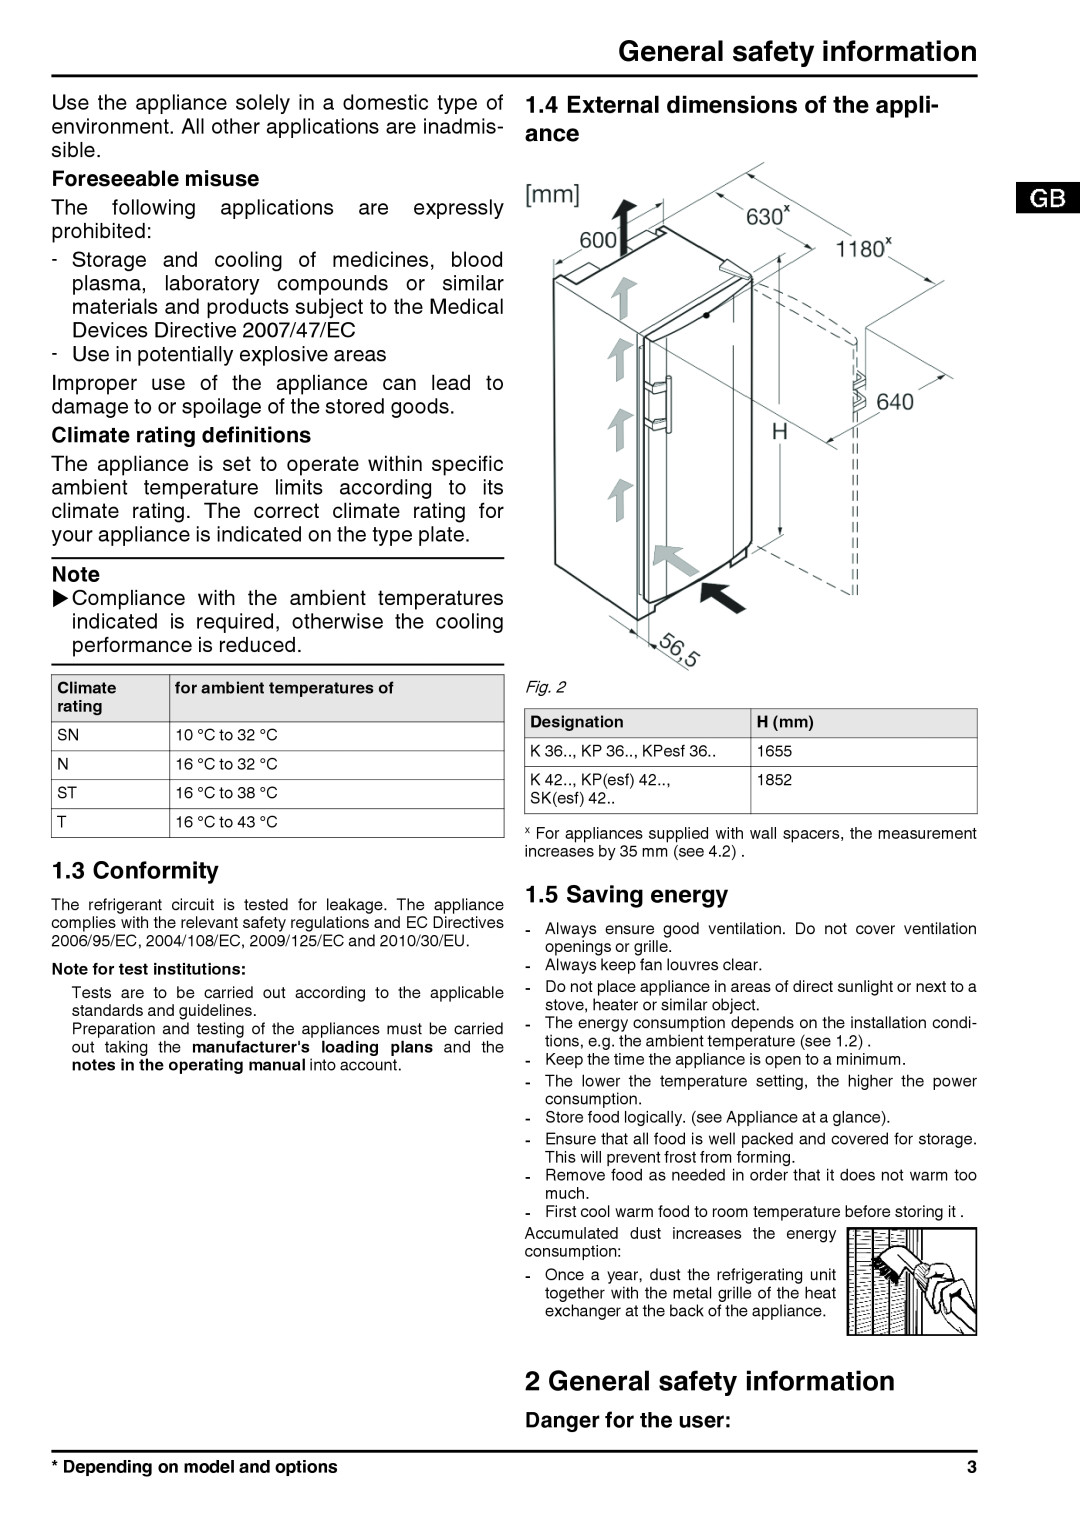 Liebherr 7085638-01 General safety information, Conformity, External dimensions of the appli- ance, Saving energy 